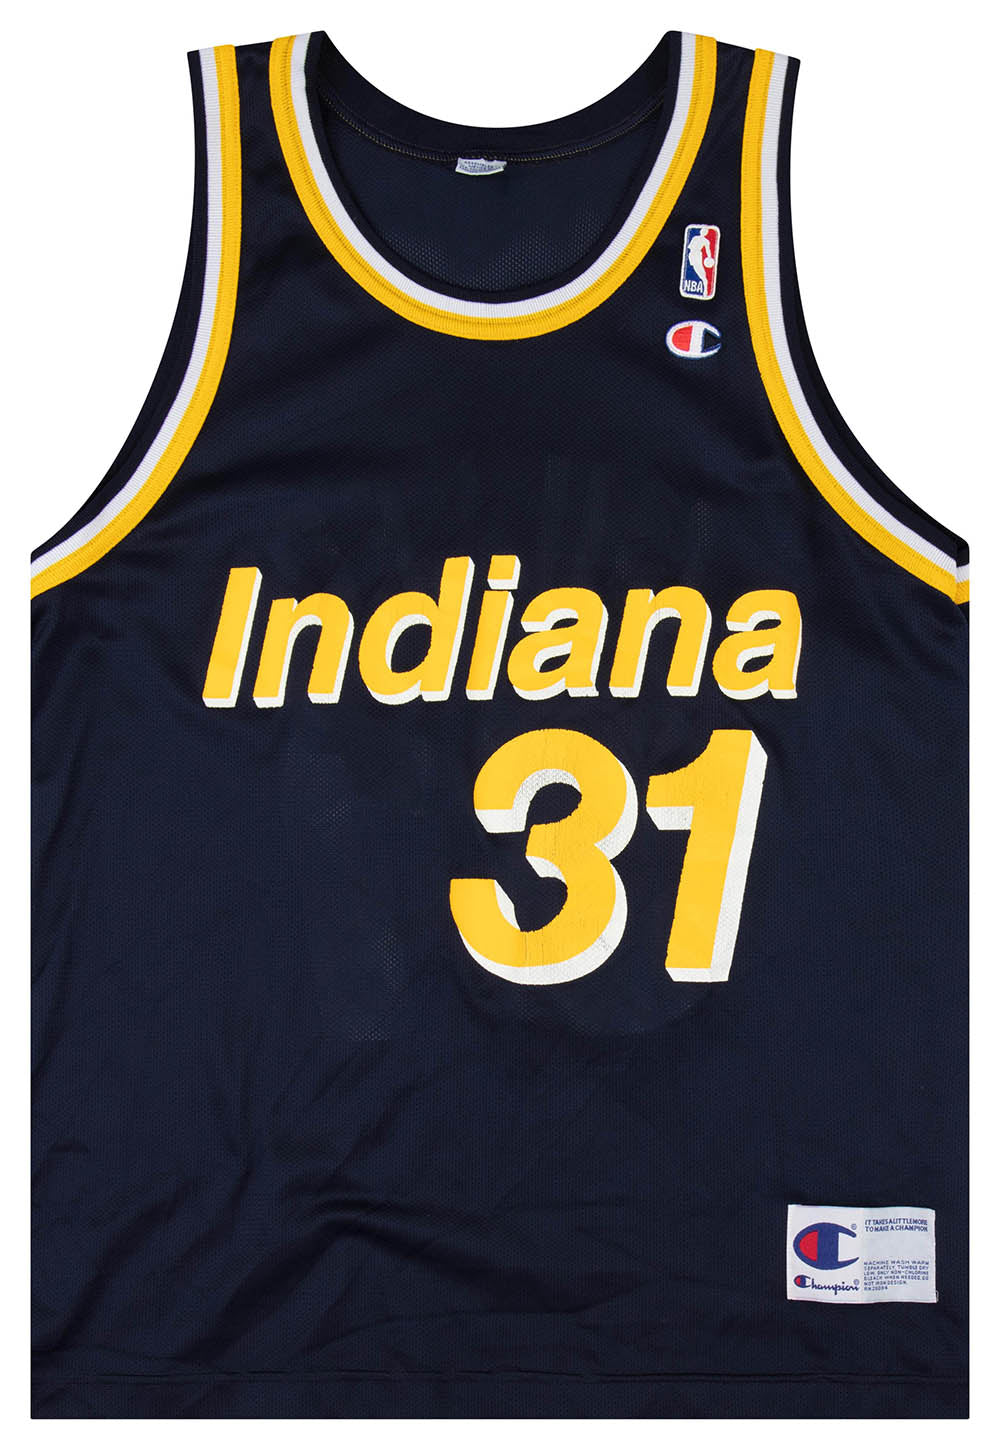 1995-97 INDIANA PACERS MILLER #31 CHAMPION JERSEY (AWAY) XL